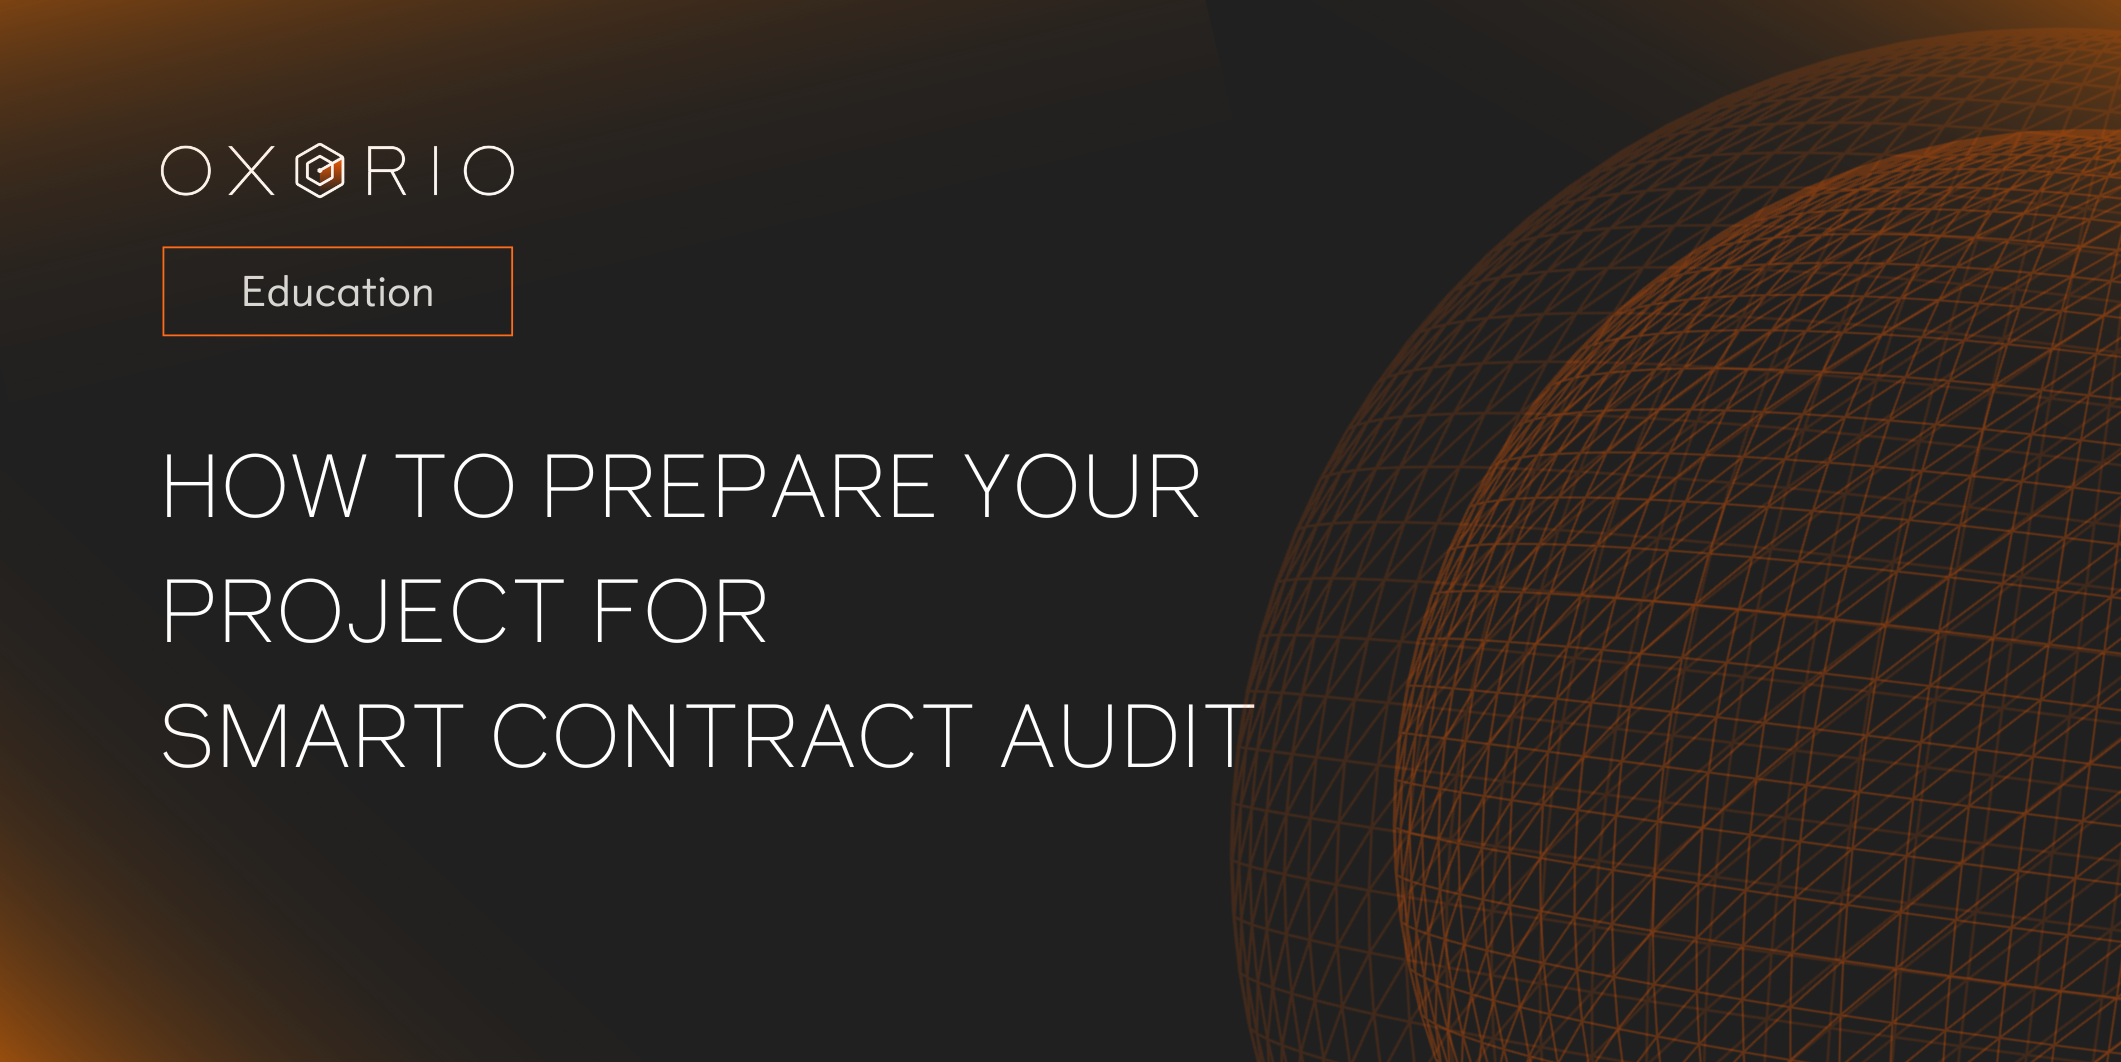 Find out how to prepare your project for a successful smart contract audit with our comprehensive guide